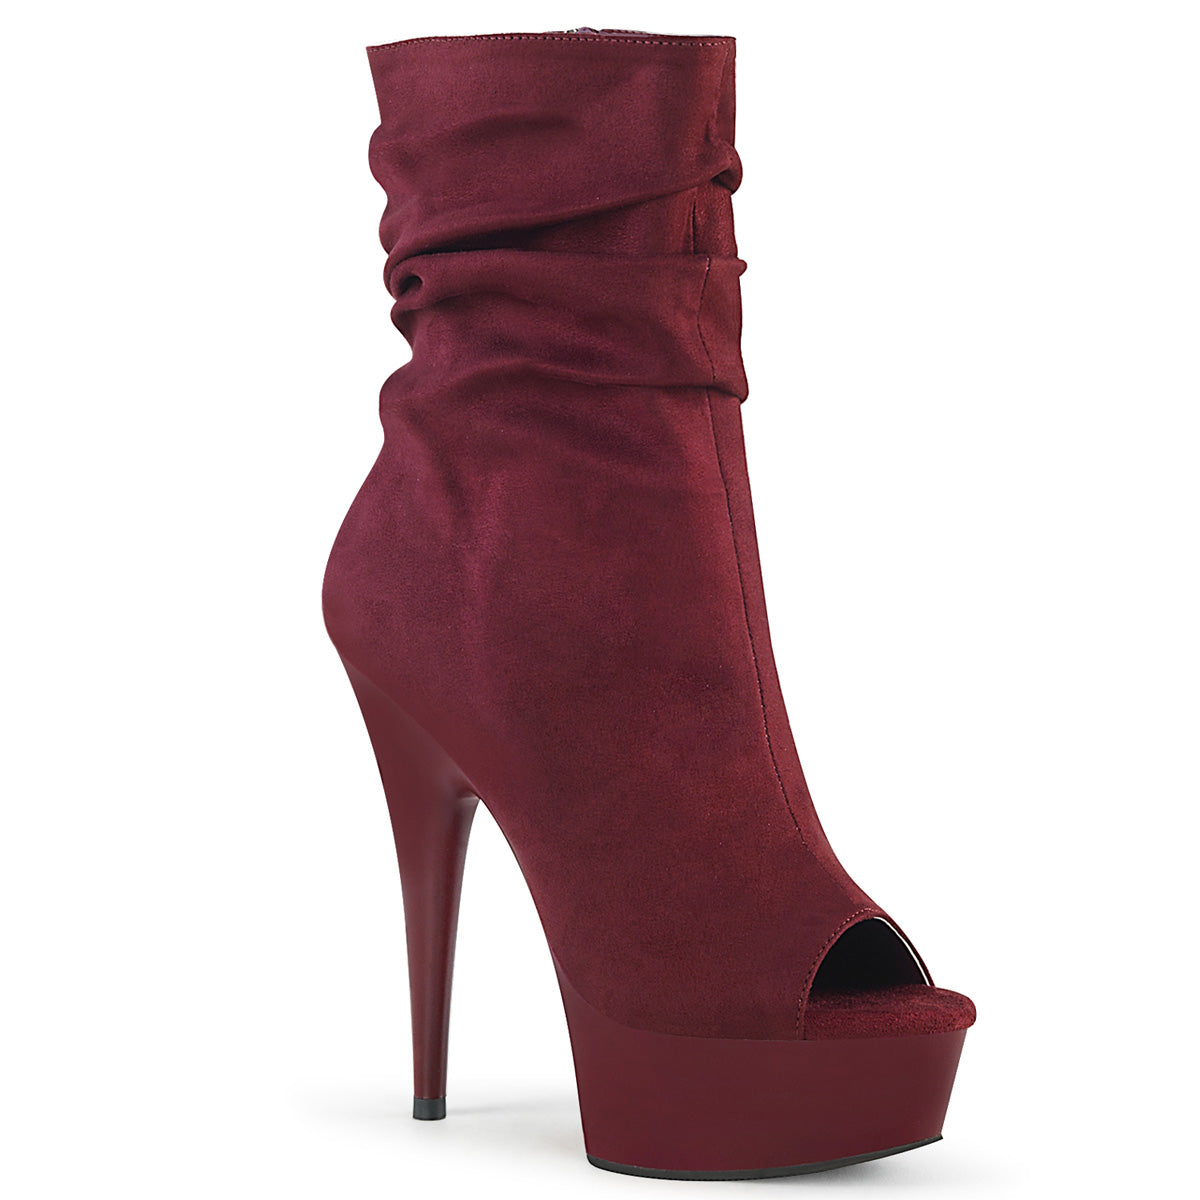 DELIGHT-1031 Burgundy Faux Suede/Burgundy Matte Ankle Boot